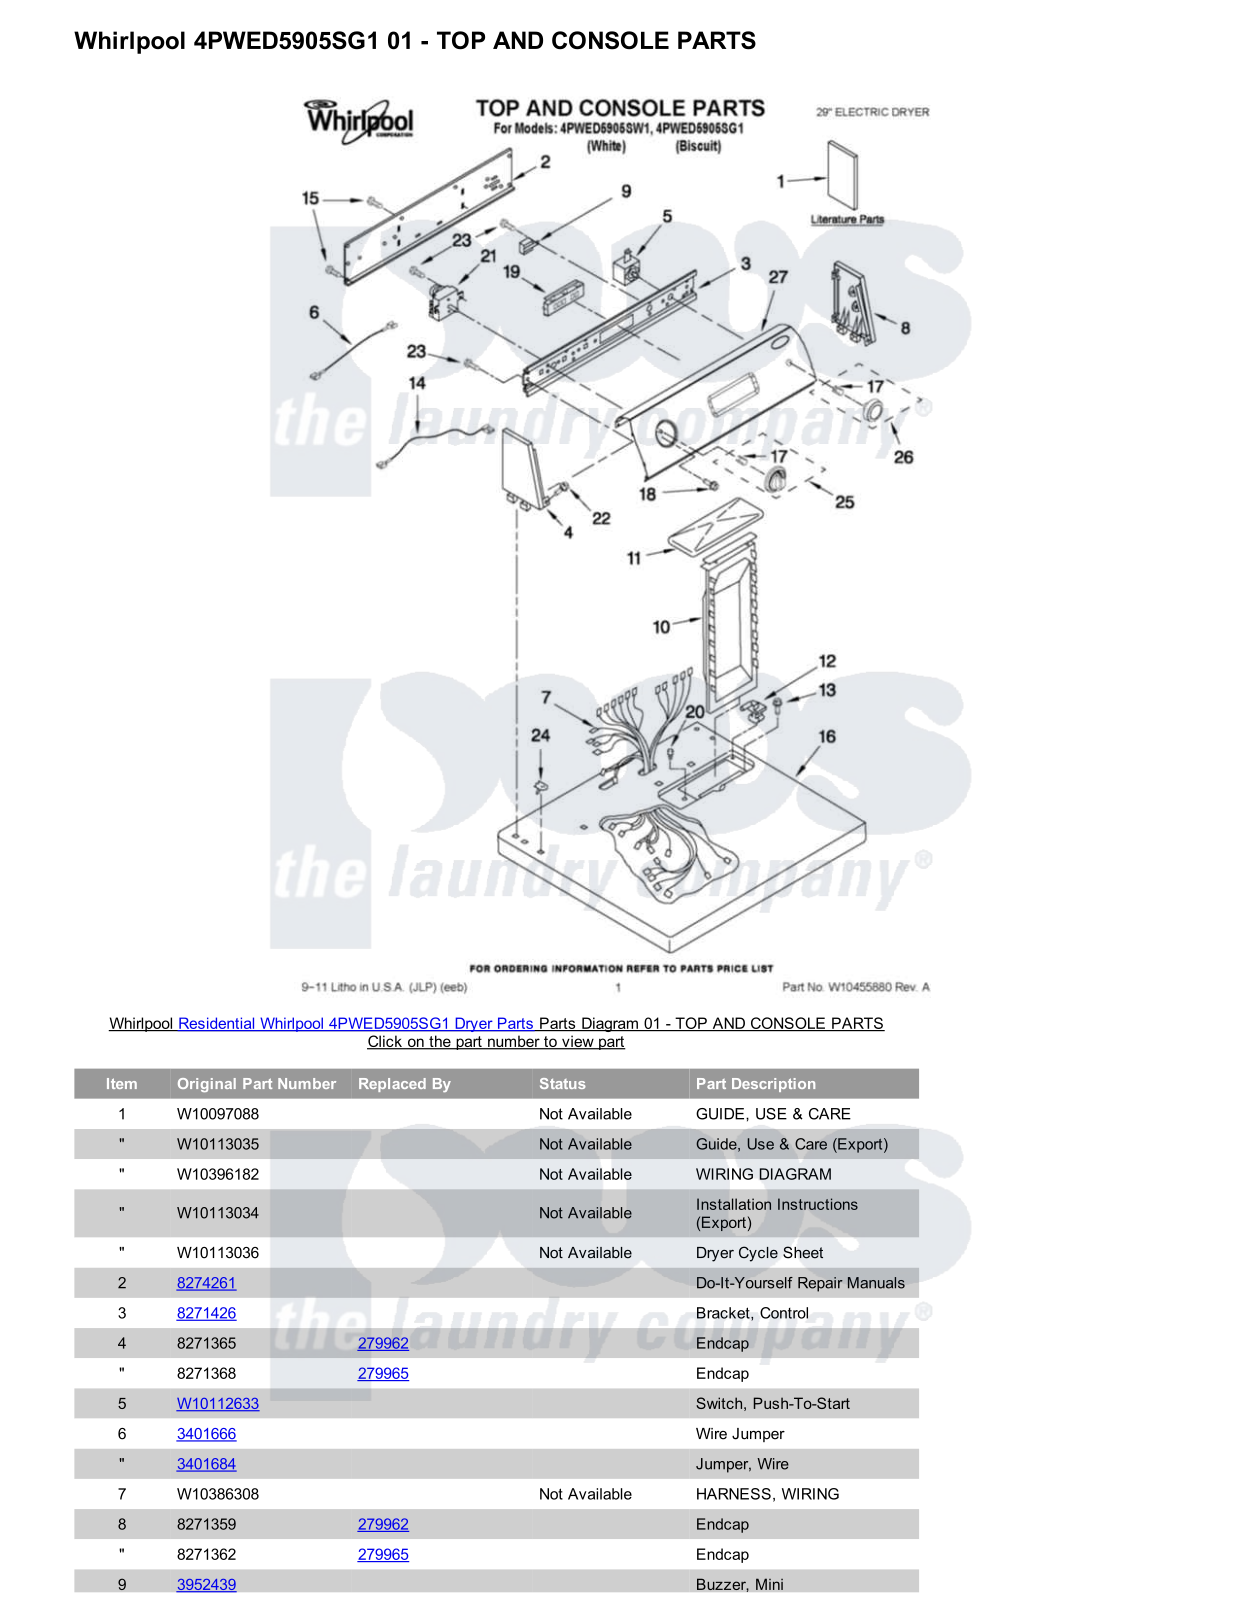 Whirlpool 4PWED5905SG1 Parts Diagram